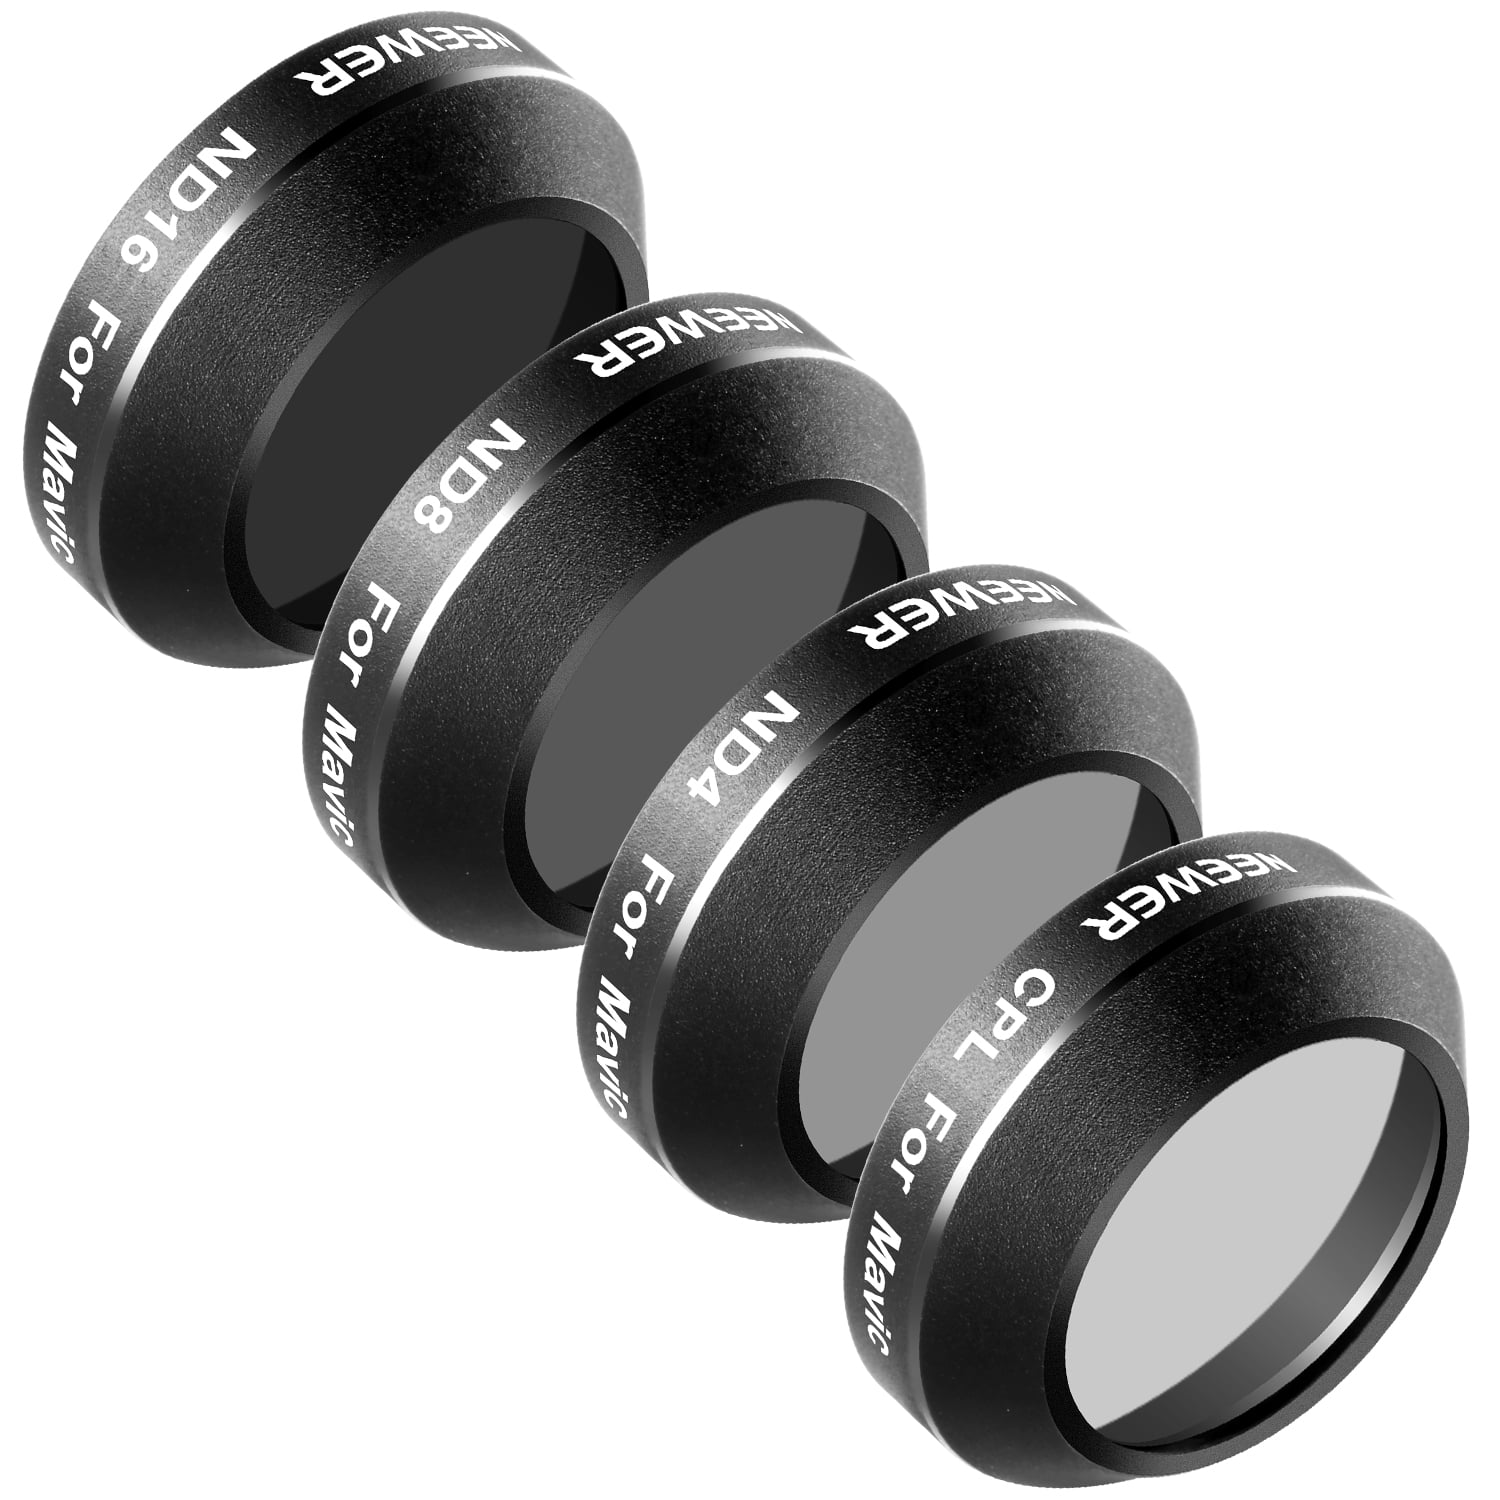 Neewer Neewer 4 Pieces Lens Filter Kit for DJI MAVIC 2 PRO Includes Multi-coated ND32 